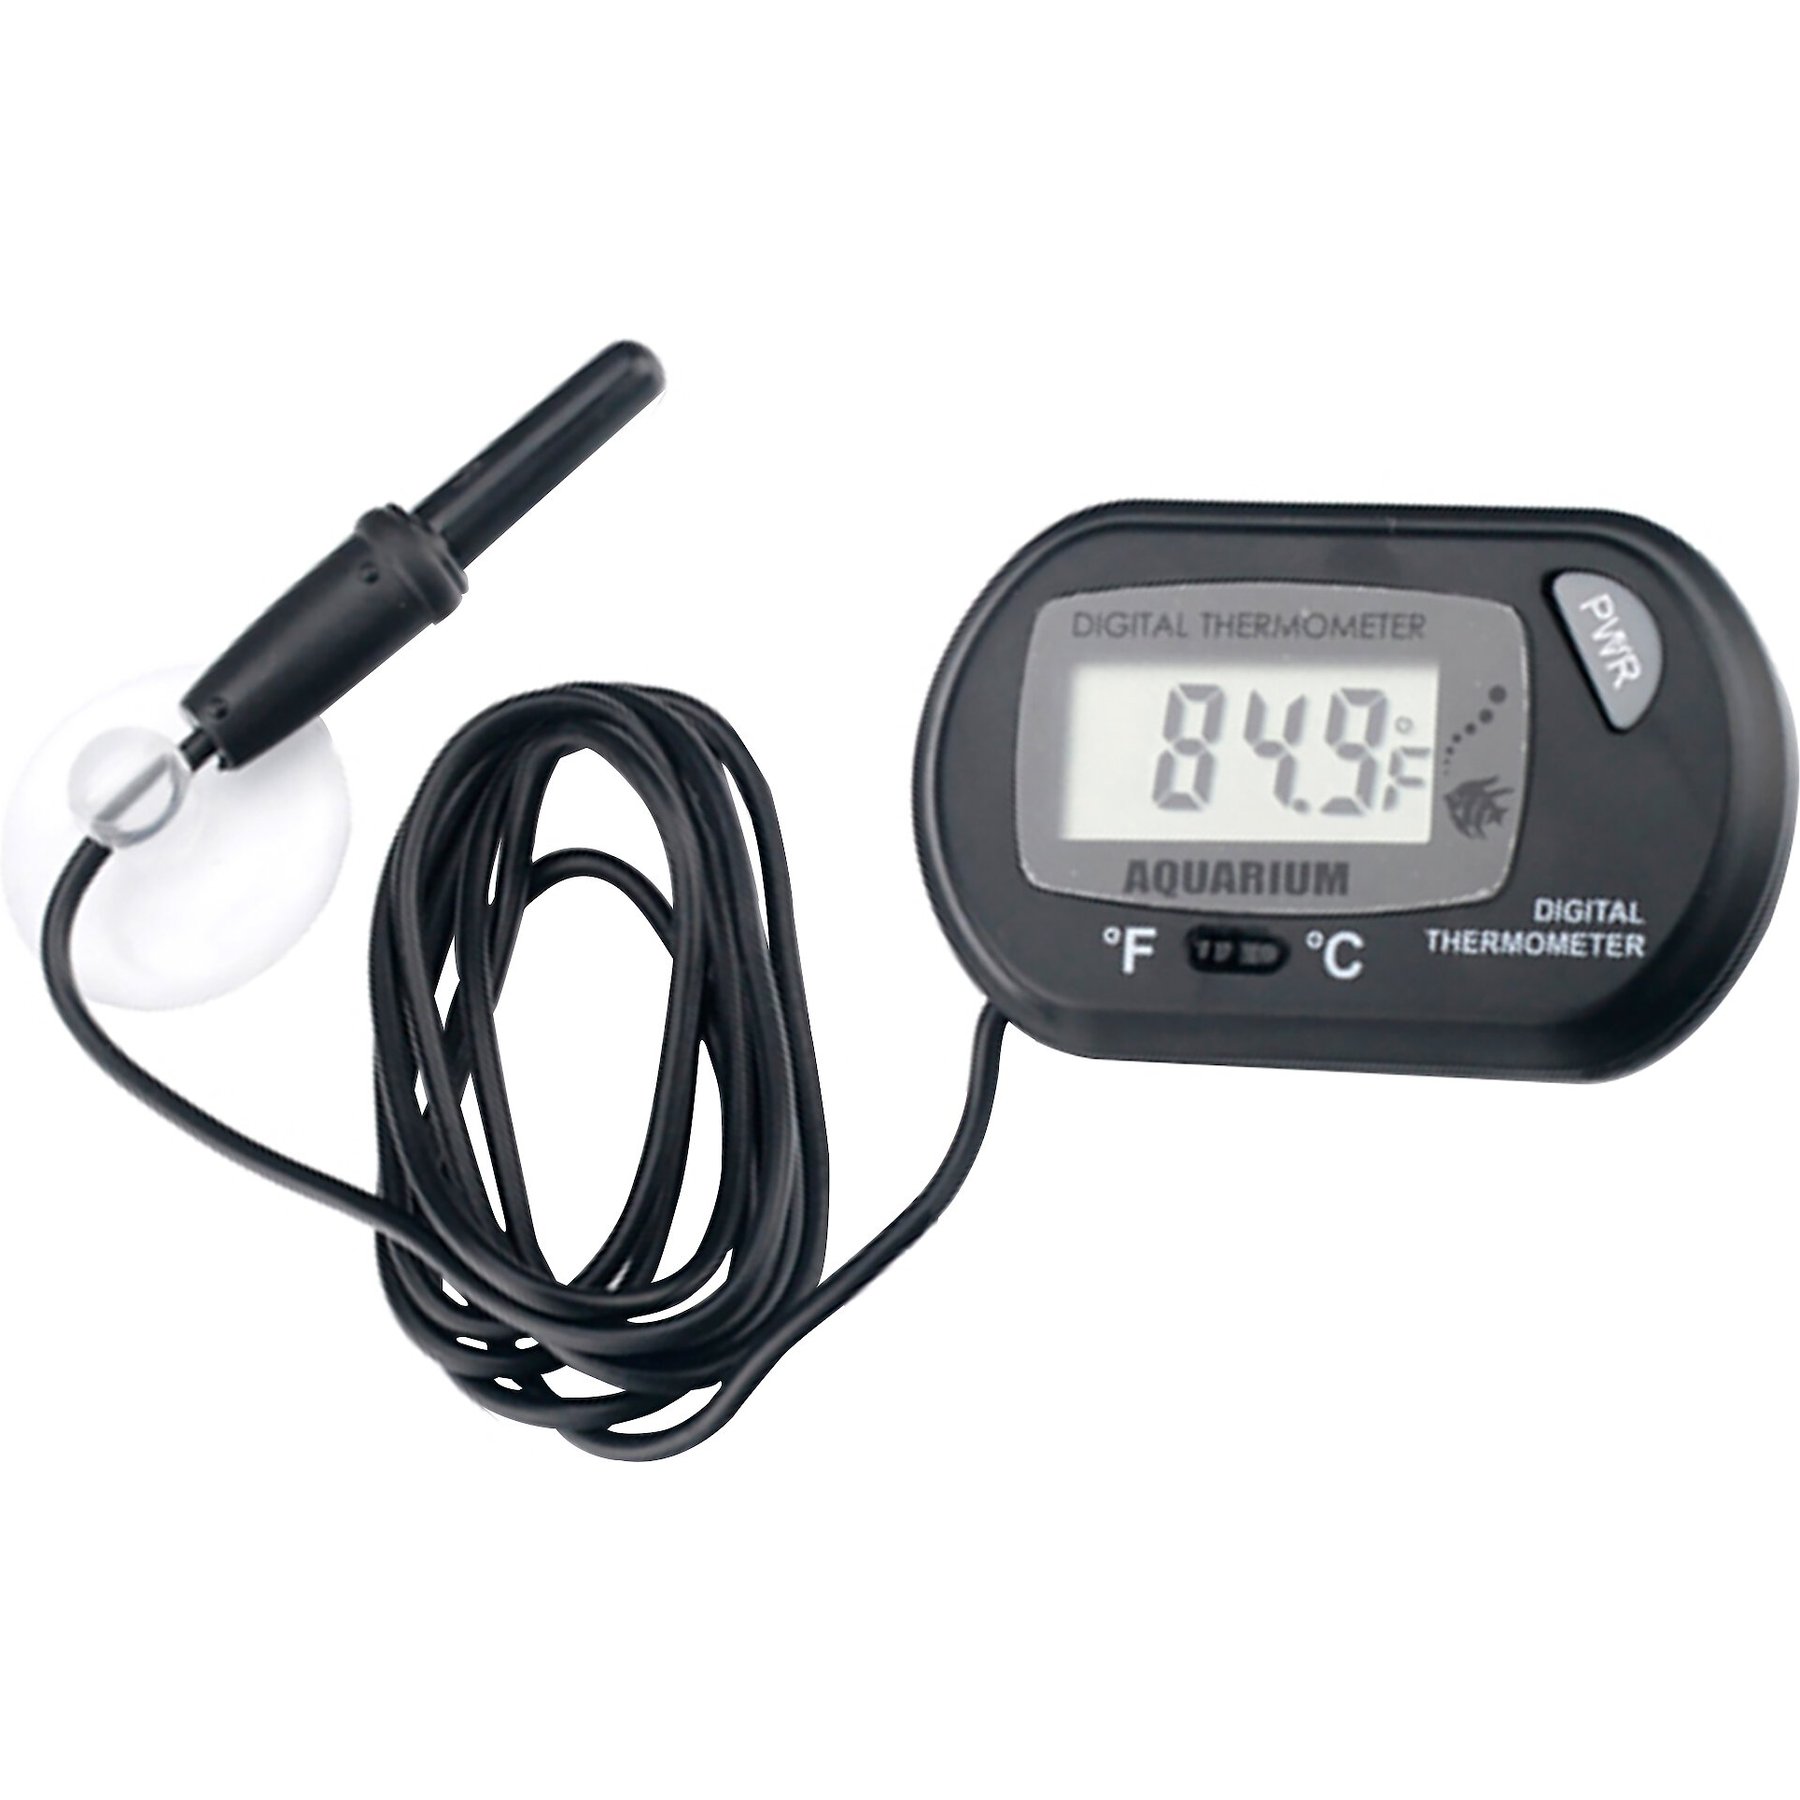 SunGrow Reptile Digital Thermometer, Waterproof Sensor Probe Monitors  Temperature Accurately, Includes Replaceable Batteries, Easy to Read Display